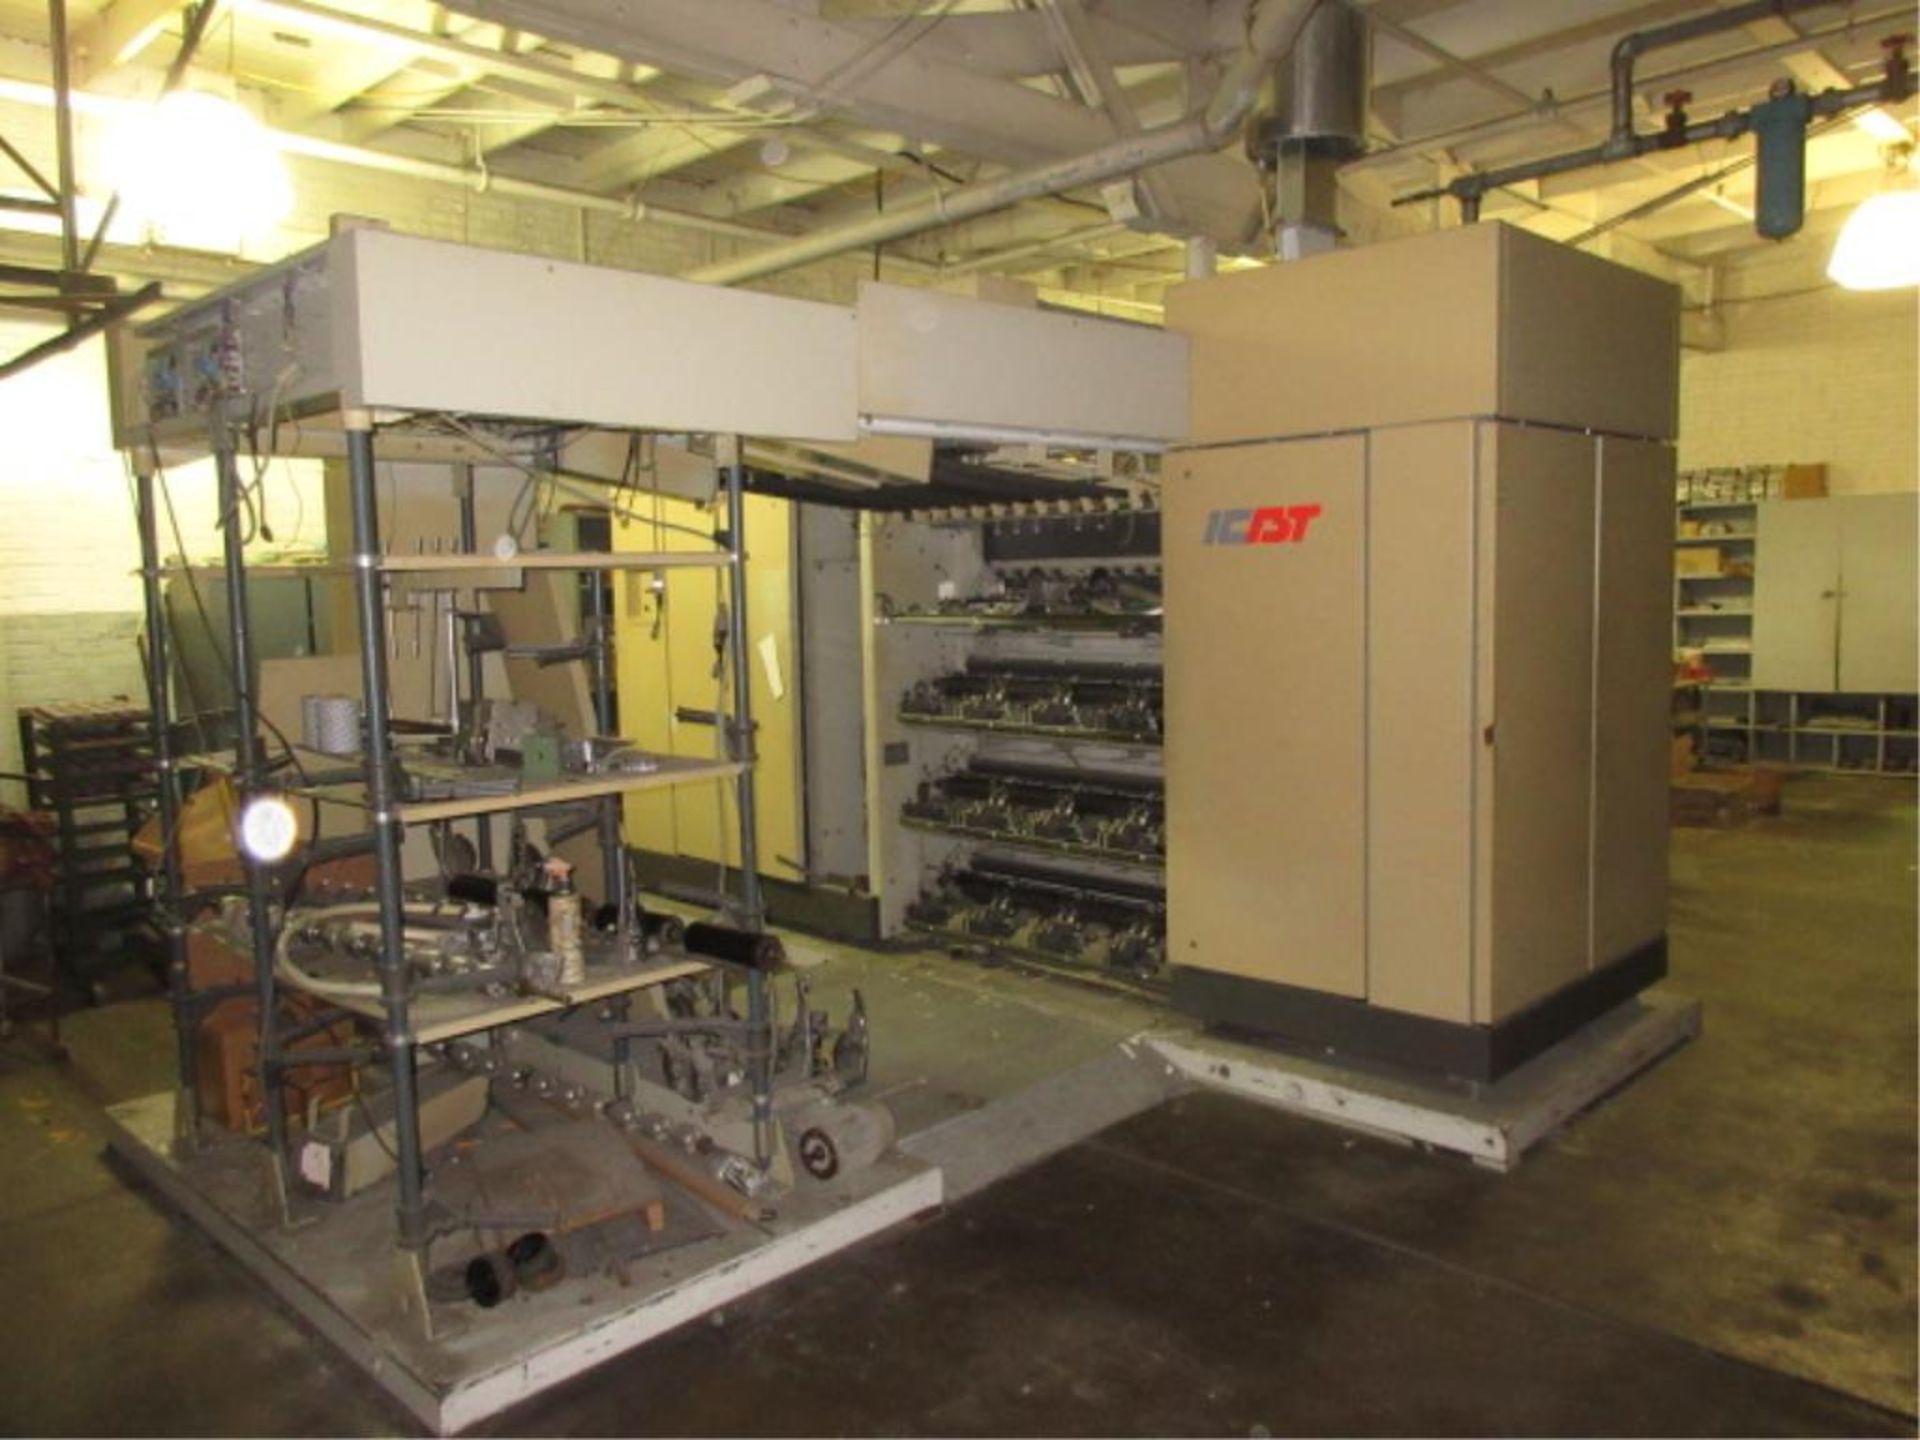 ICBT FT15-E3 HT Sample Texturing Machine, (1996), parted out, not in running condition, please